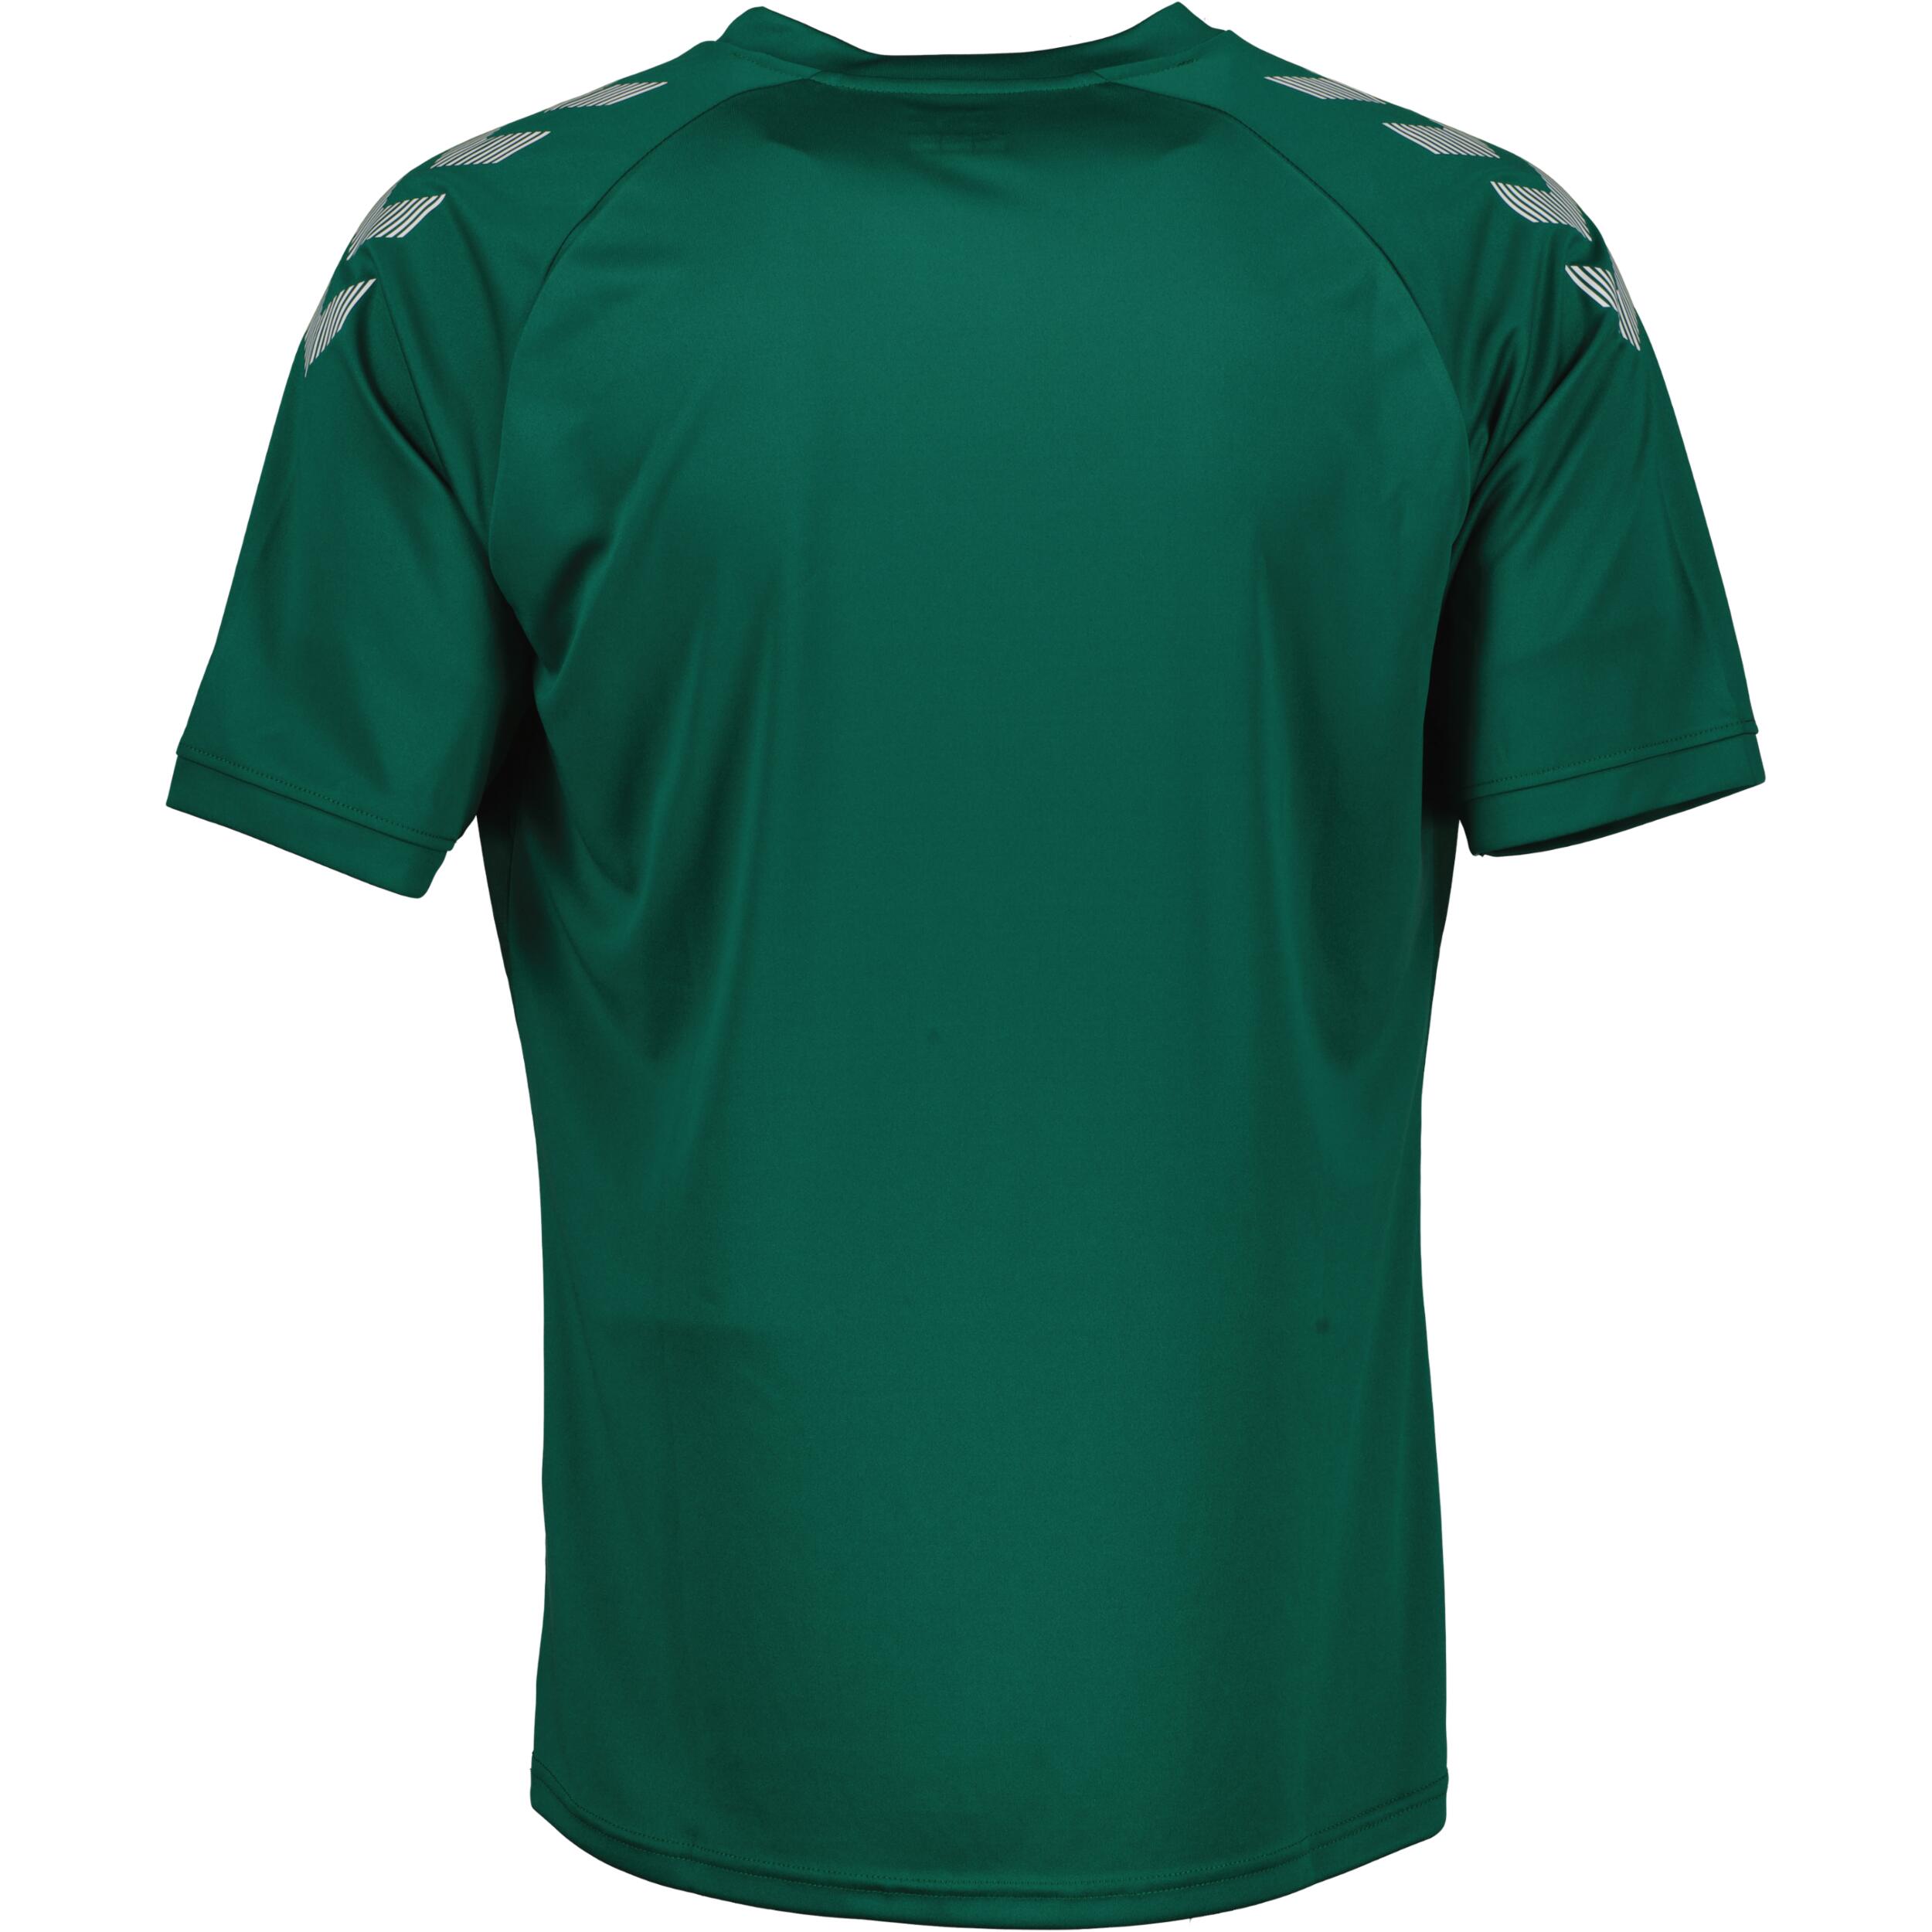 Poly jersey for kids, great for football, in evergreen 2/3